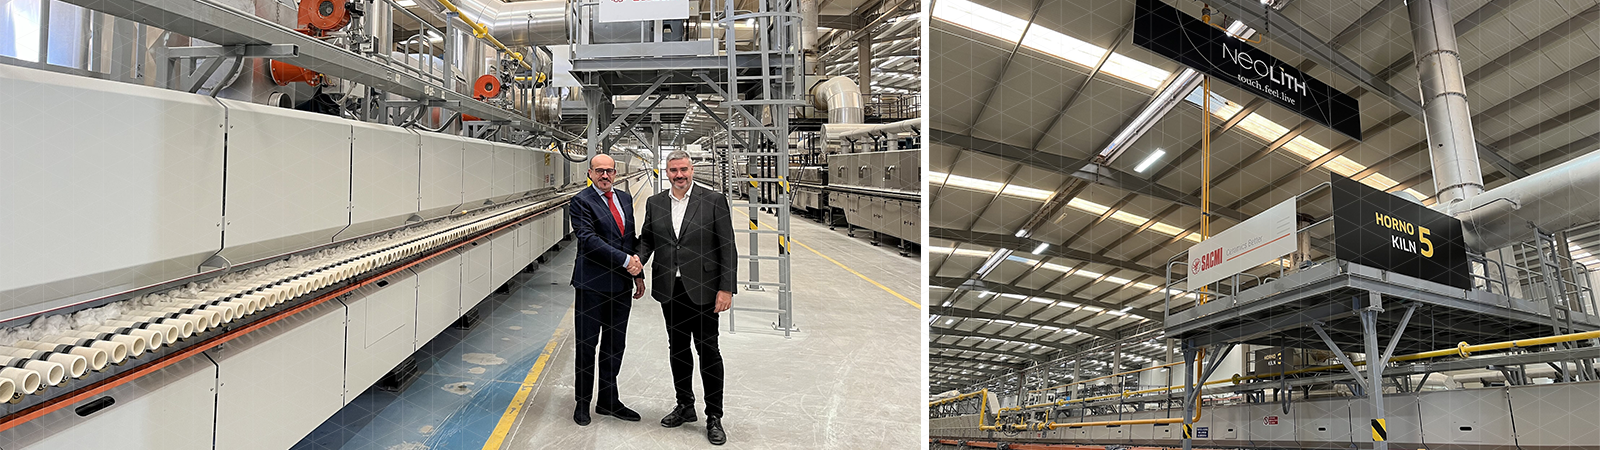 Neolith (Spain) doubles its output capacity with the new SACMI FMA «Maestro», the most technologically advanced kiln on the market